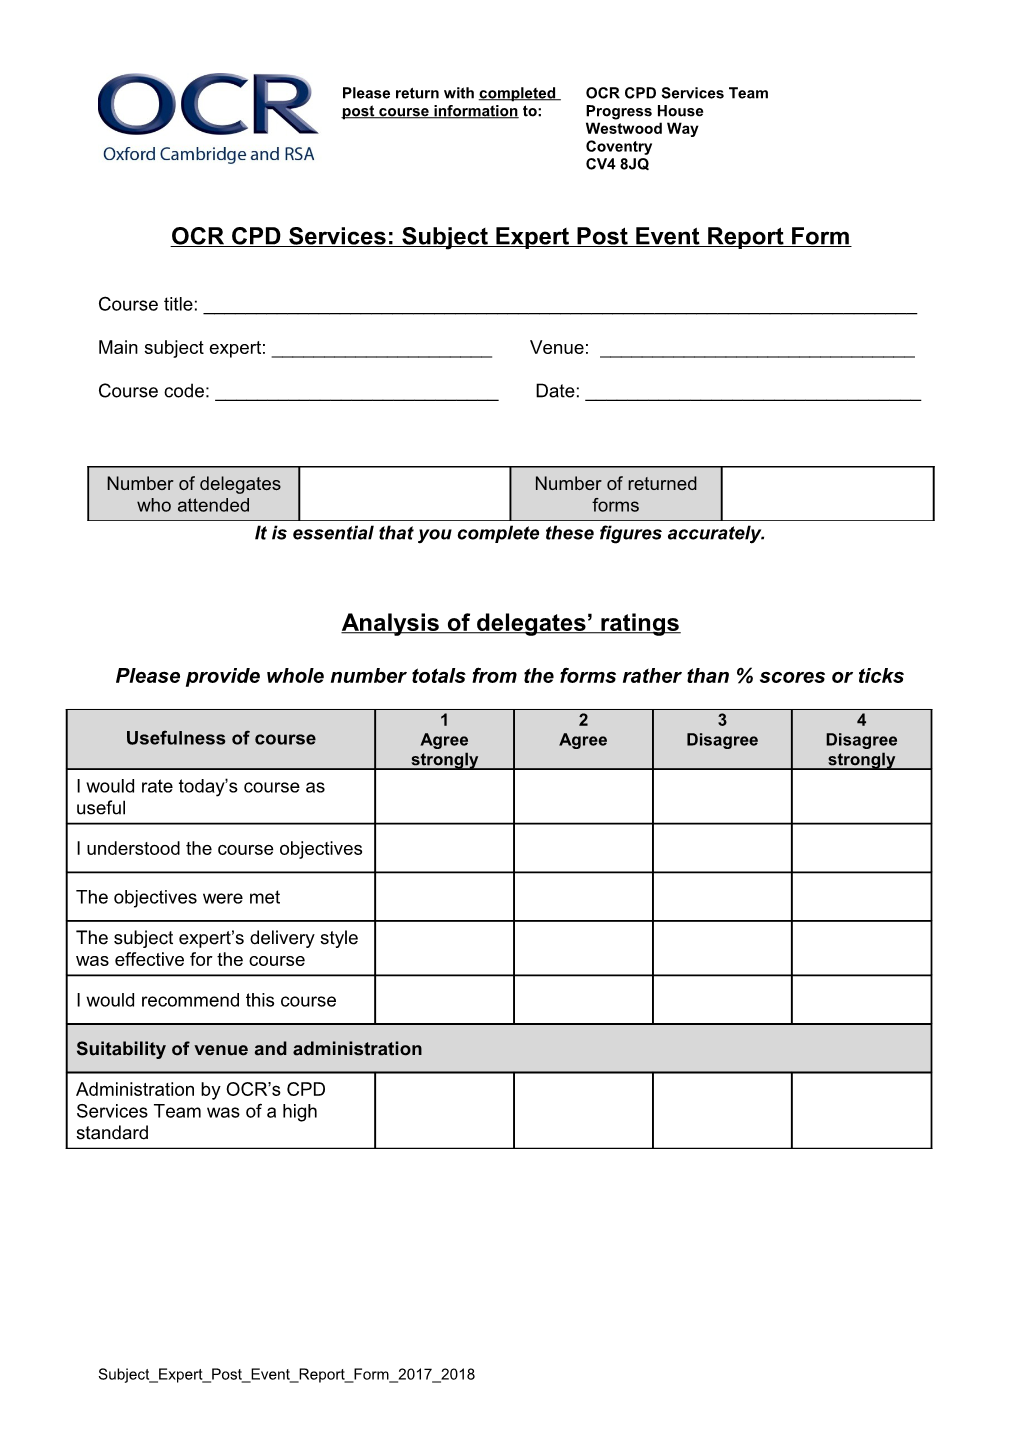 Please Complete This Form and Hand It to Your Course Trainer